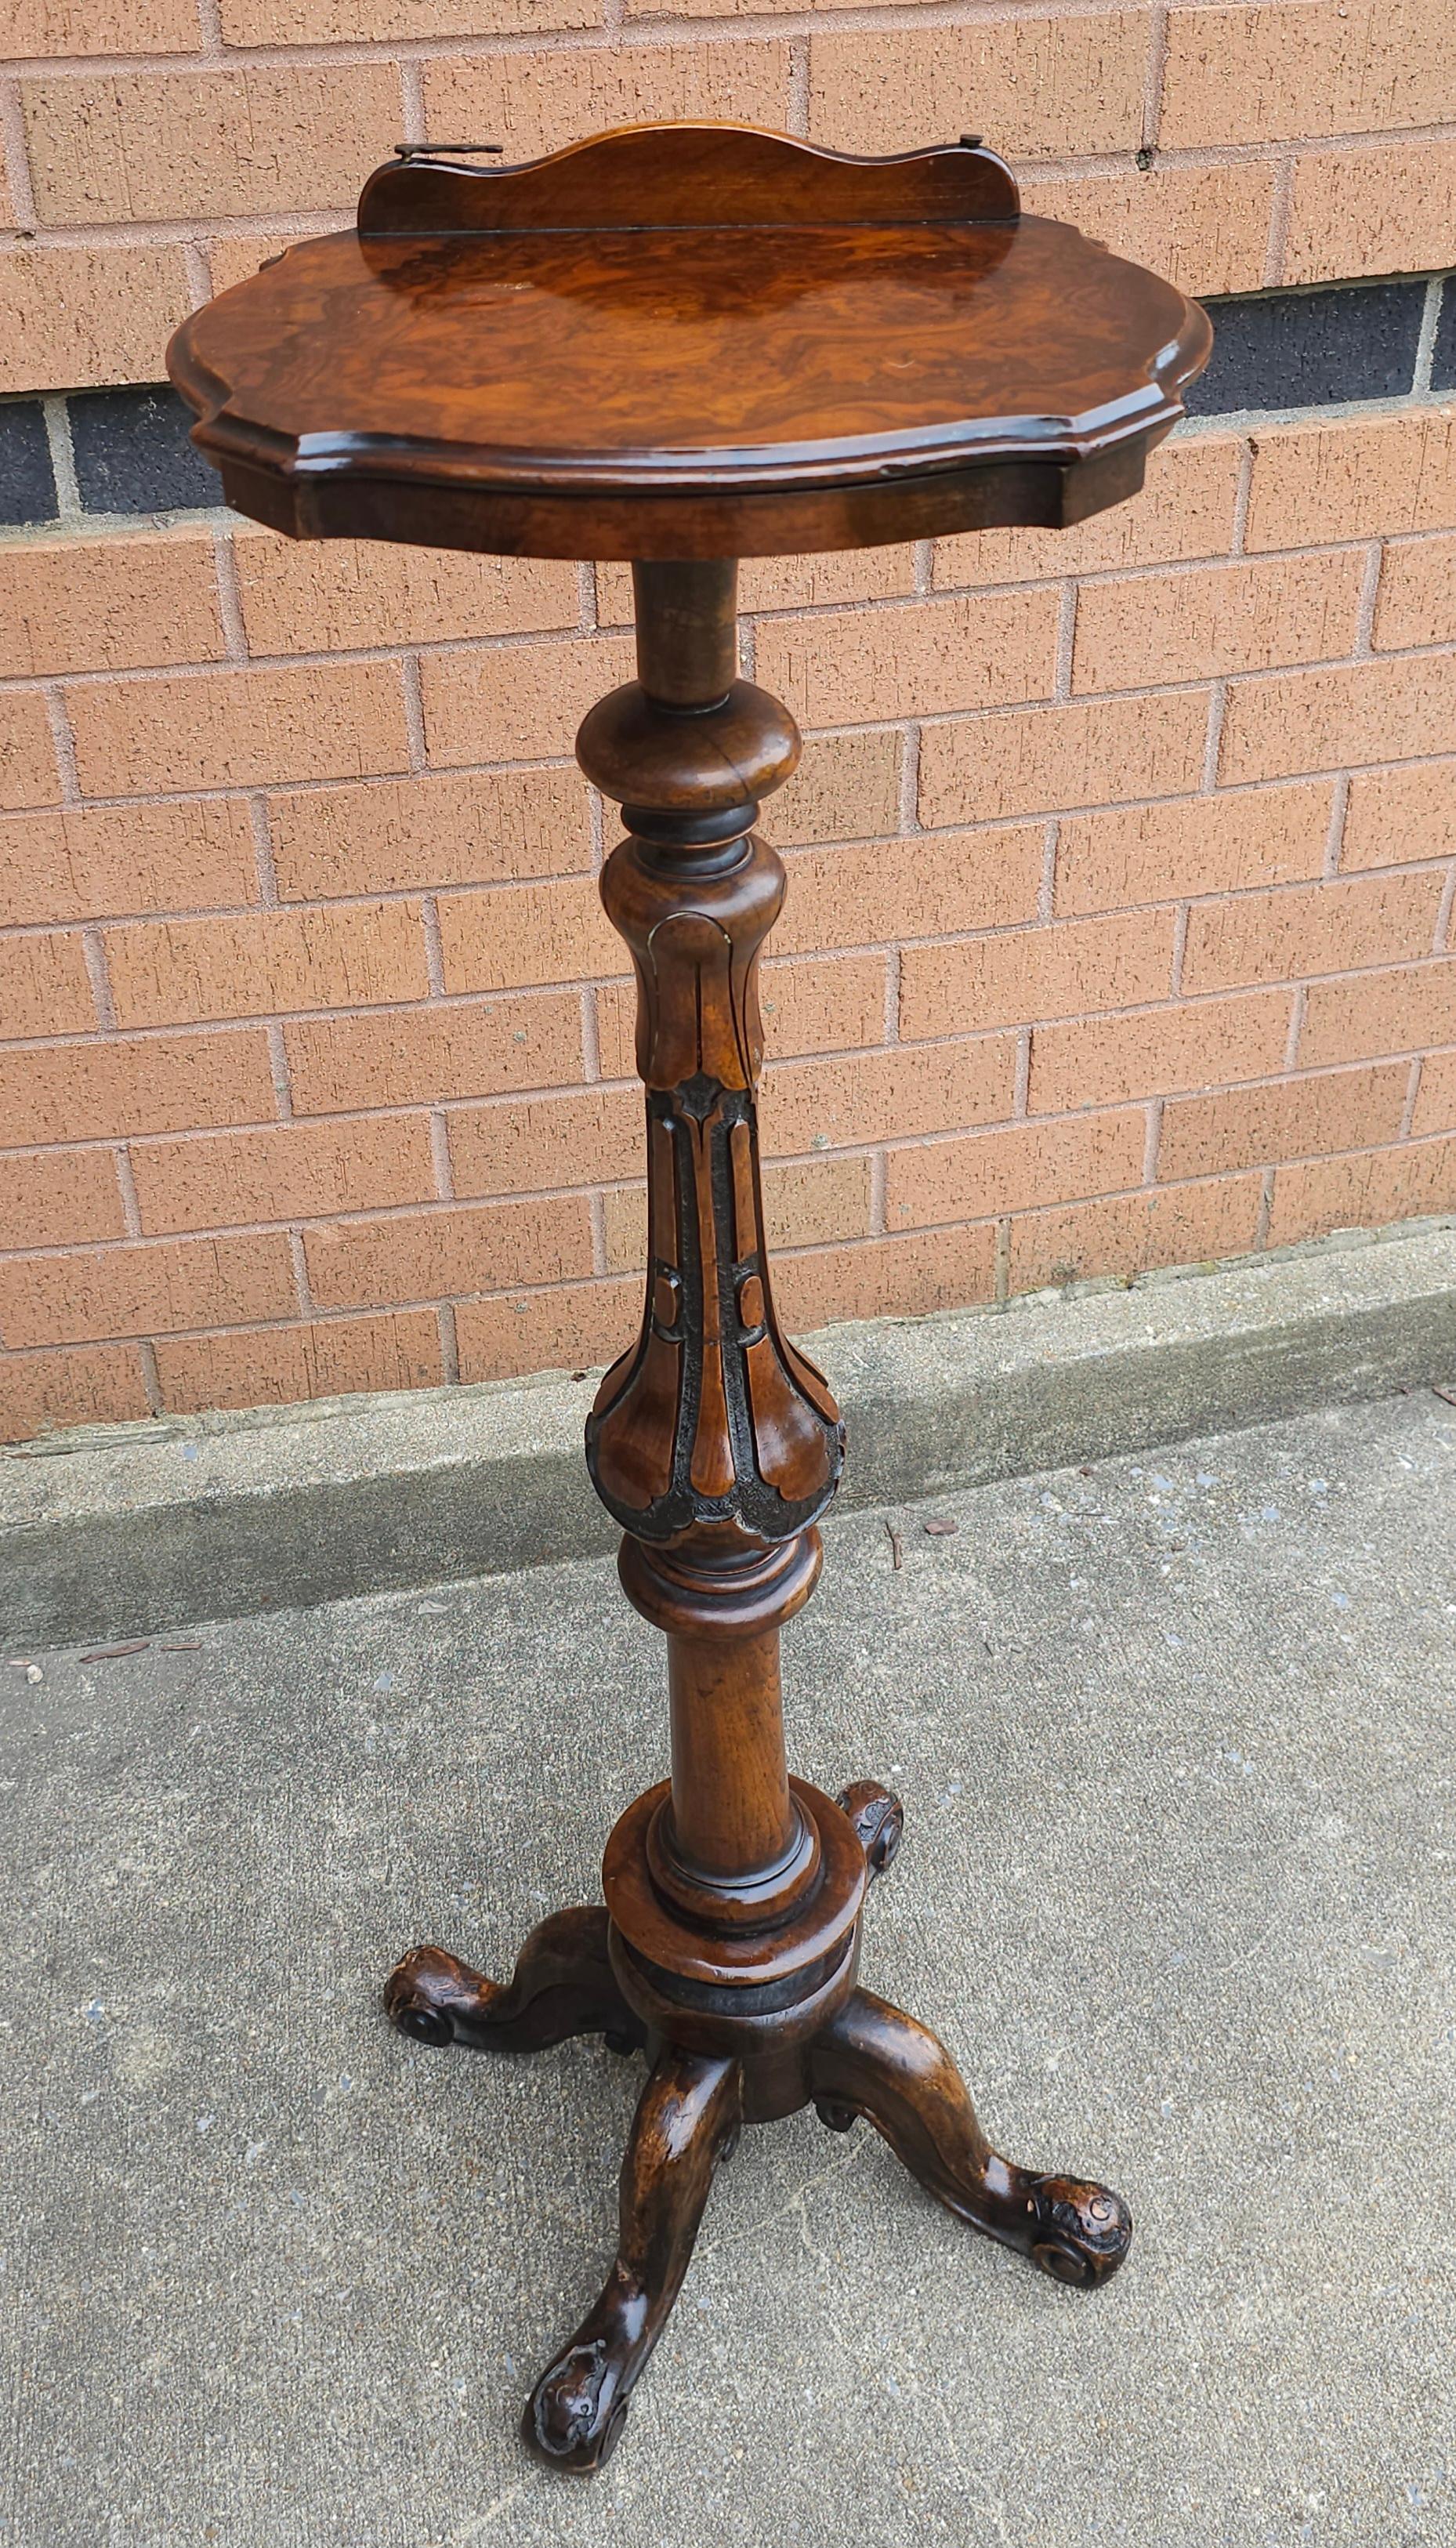 19th Century Victorian Rococo Revival Walnut Quadpod Music Stand In Good Condition For Sale In Germantown, MD